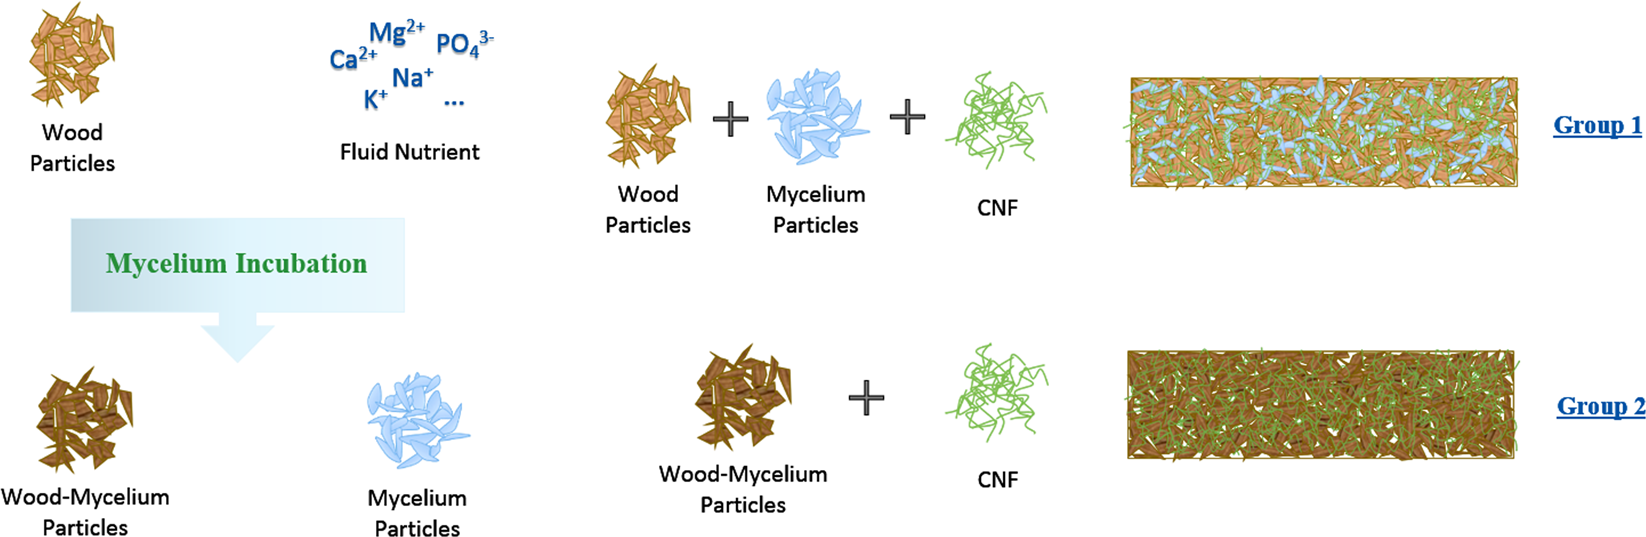 Synthesis and applications of fungal mycelium-based advanced